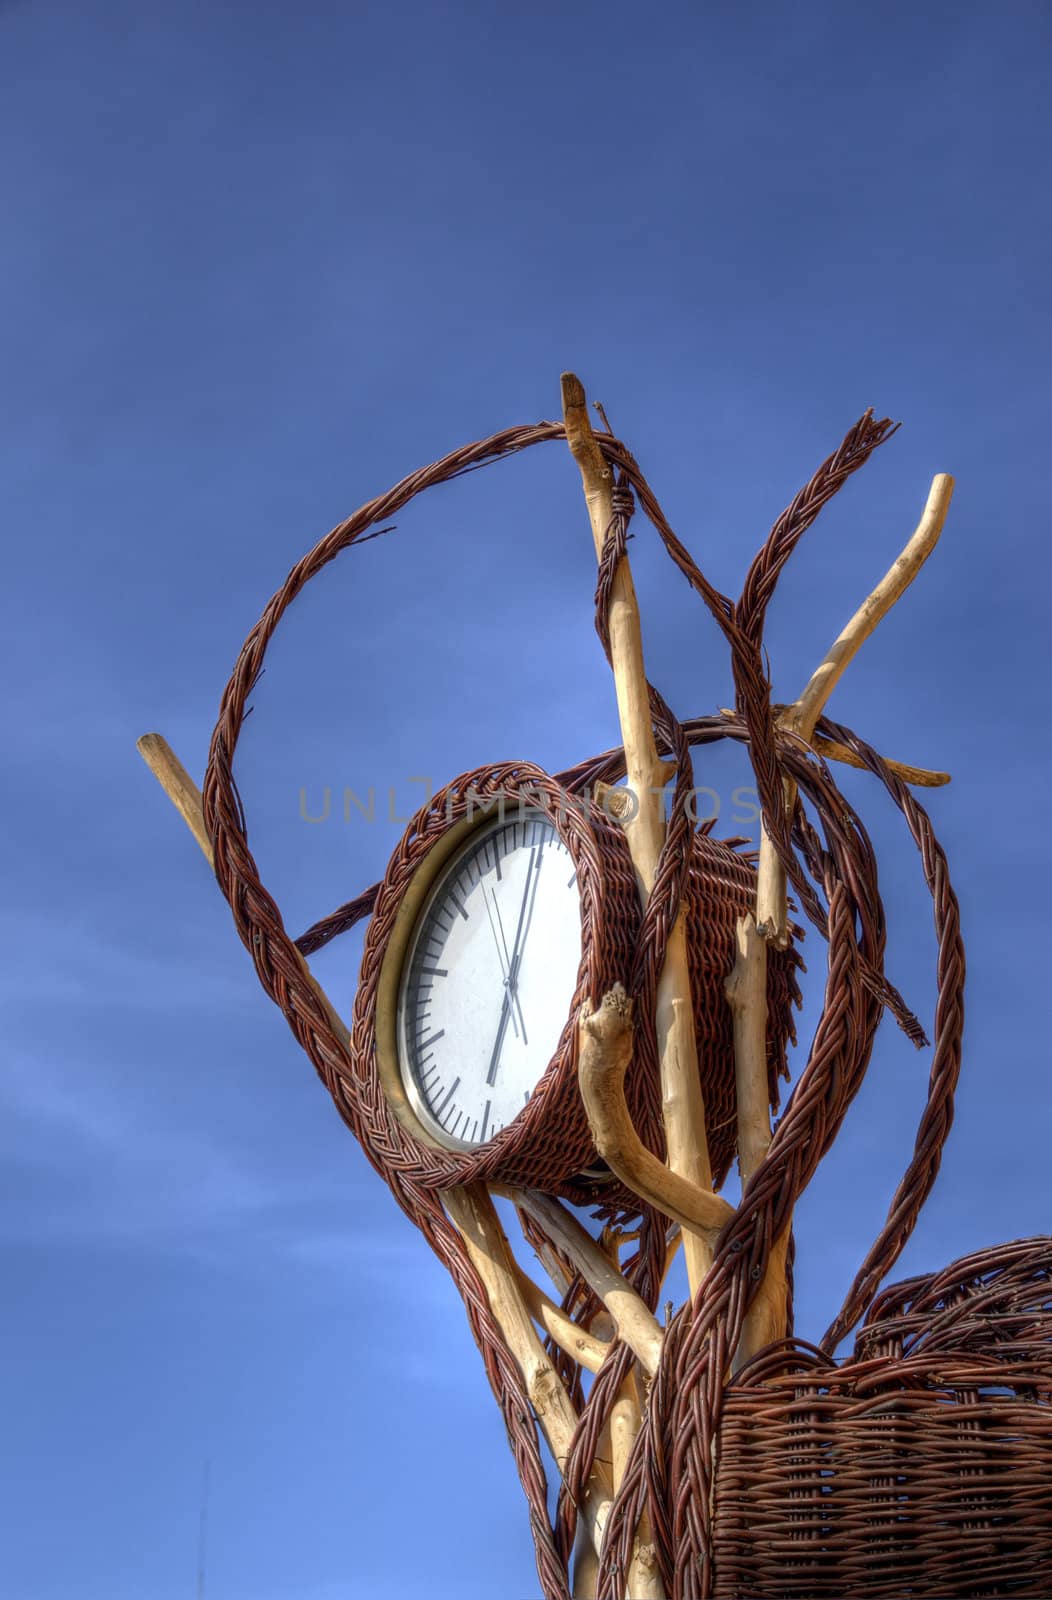 This photo present, wicker clock New Tomyśl in Poland HDR.